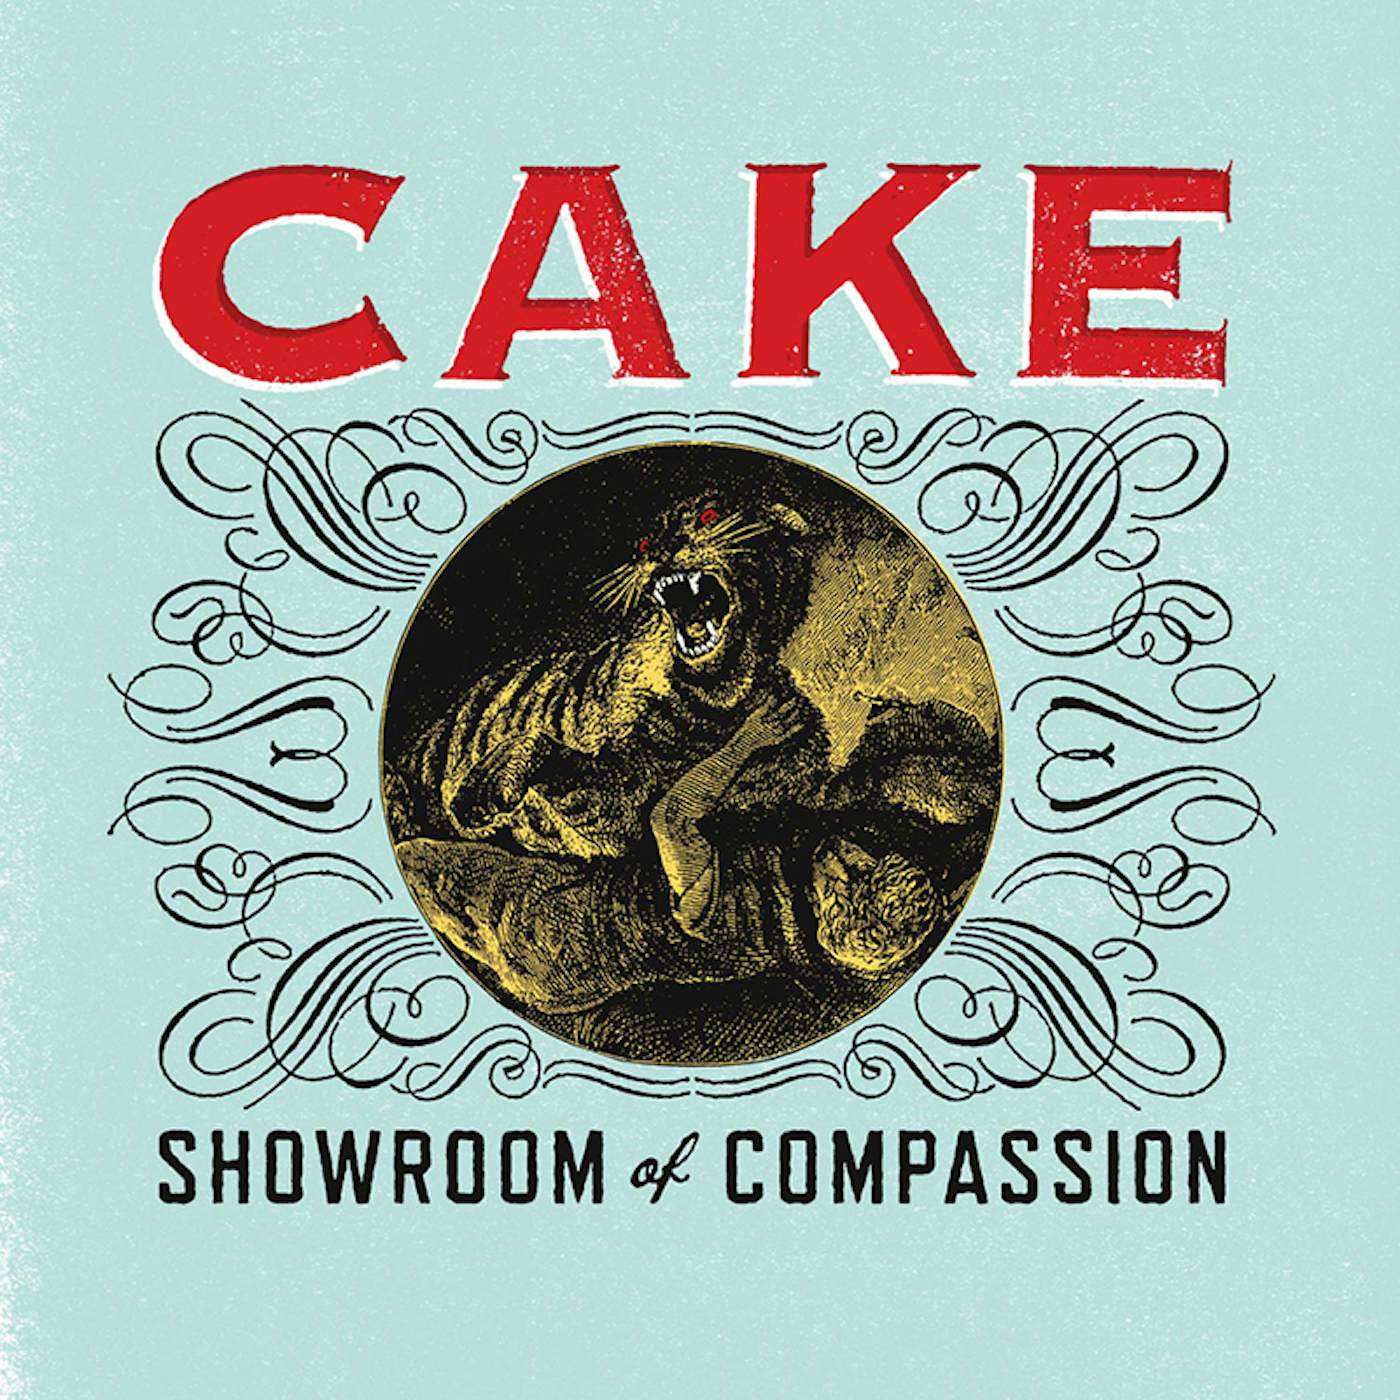 CAKE SHOWROOM OF COMPASSION CD